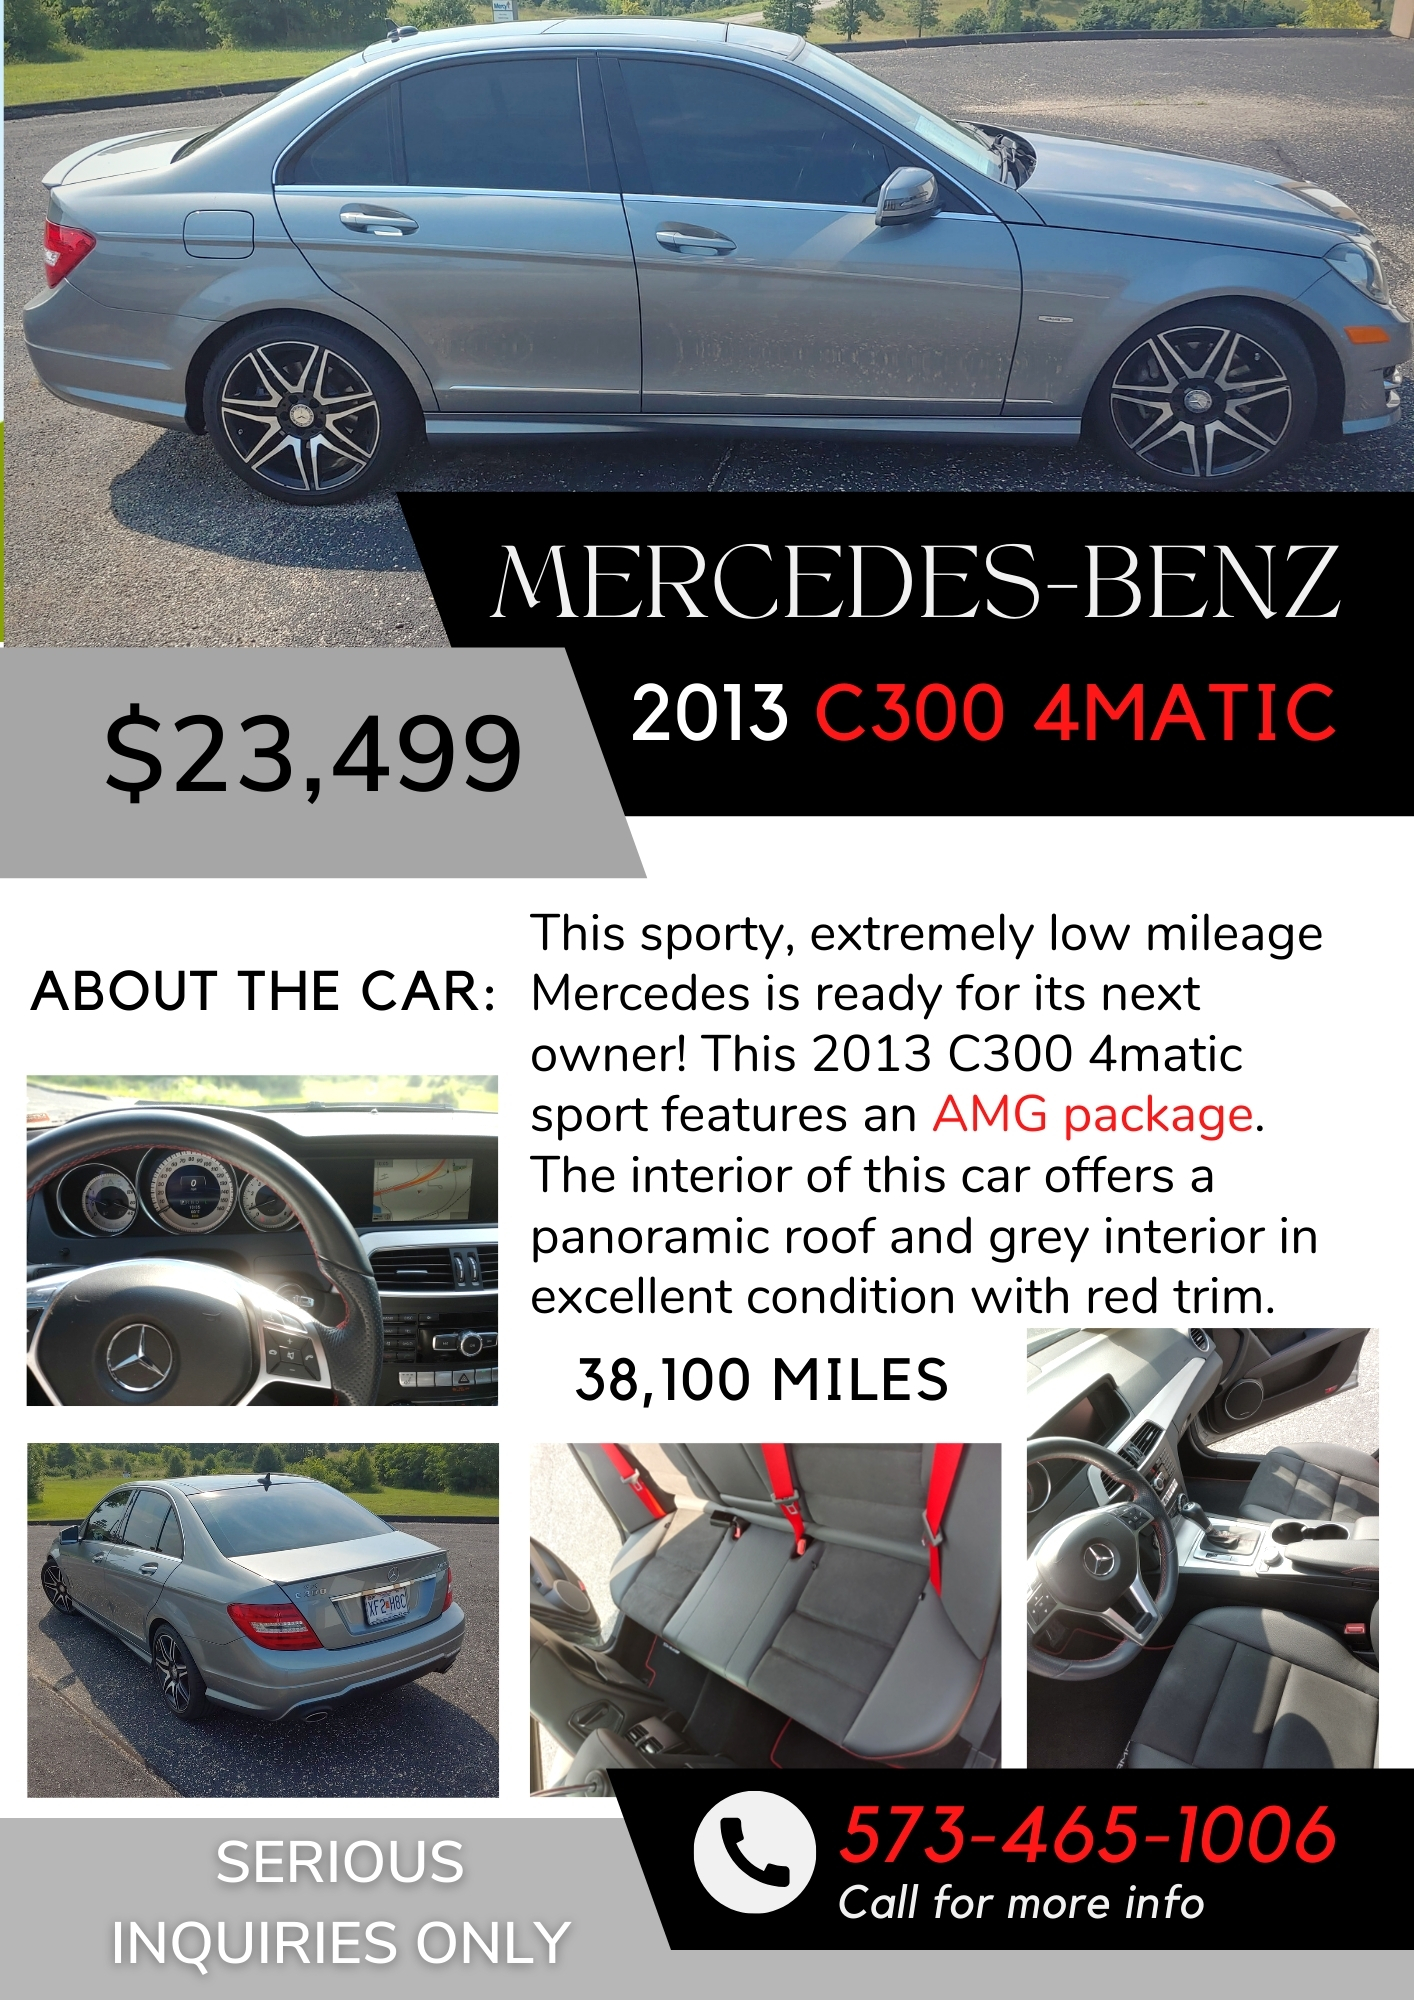 This sporty, extremely low mileage Mercedes is ready for its next owner! This 2013 C300 4matic features an AMG package. The interior of this car offers a panoramic roof and grey interior in excellent condition with red trim.